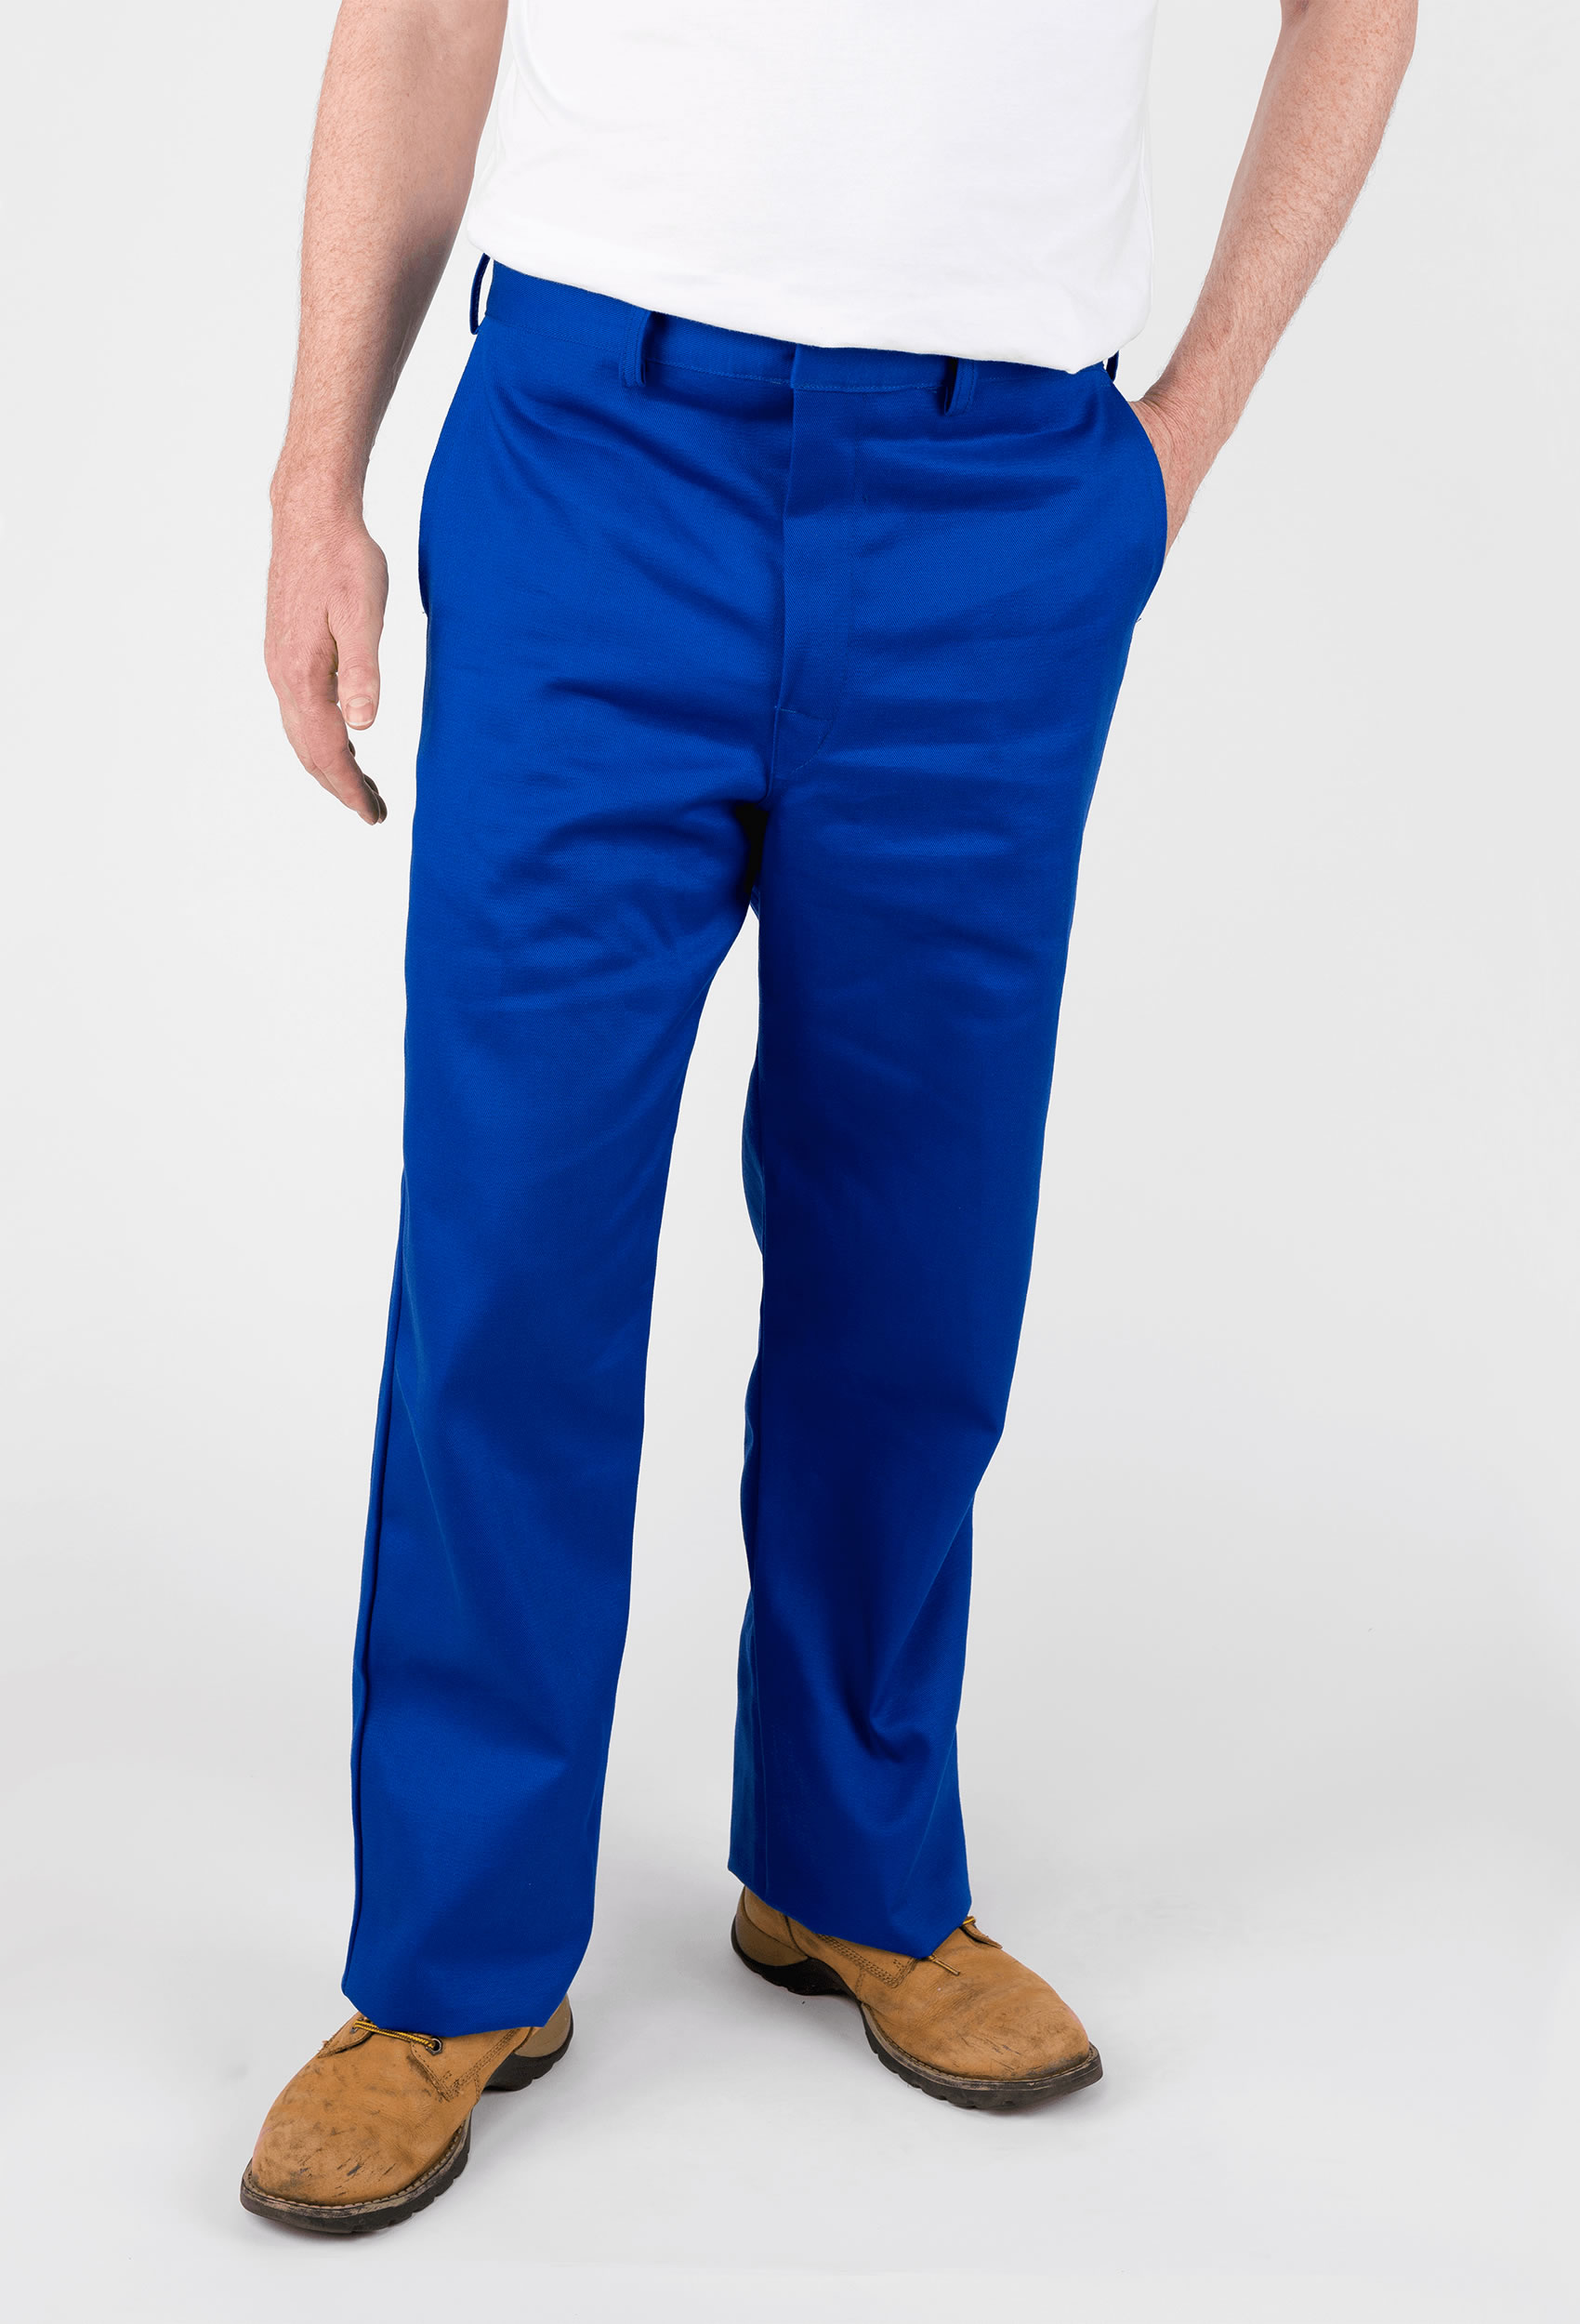 Flame Retardant Trousers | Workwear & Protective Clothing | Ballyclare